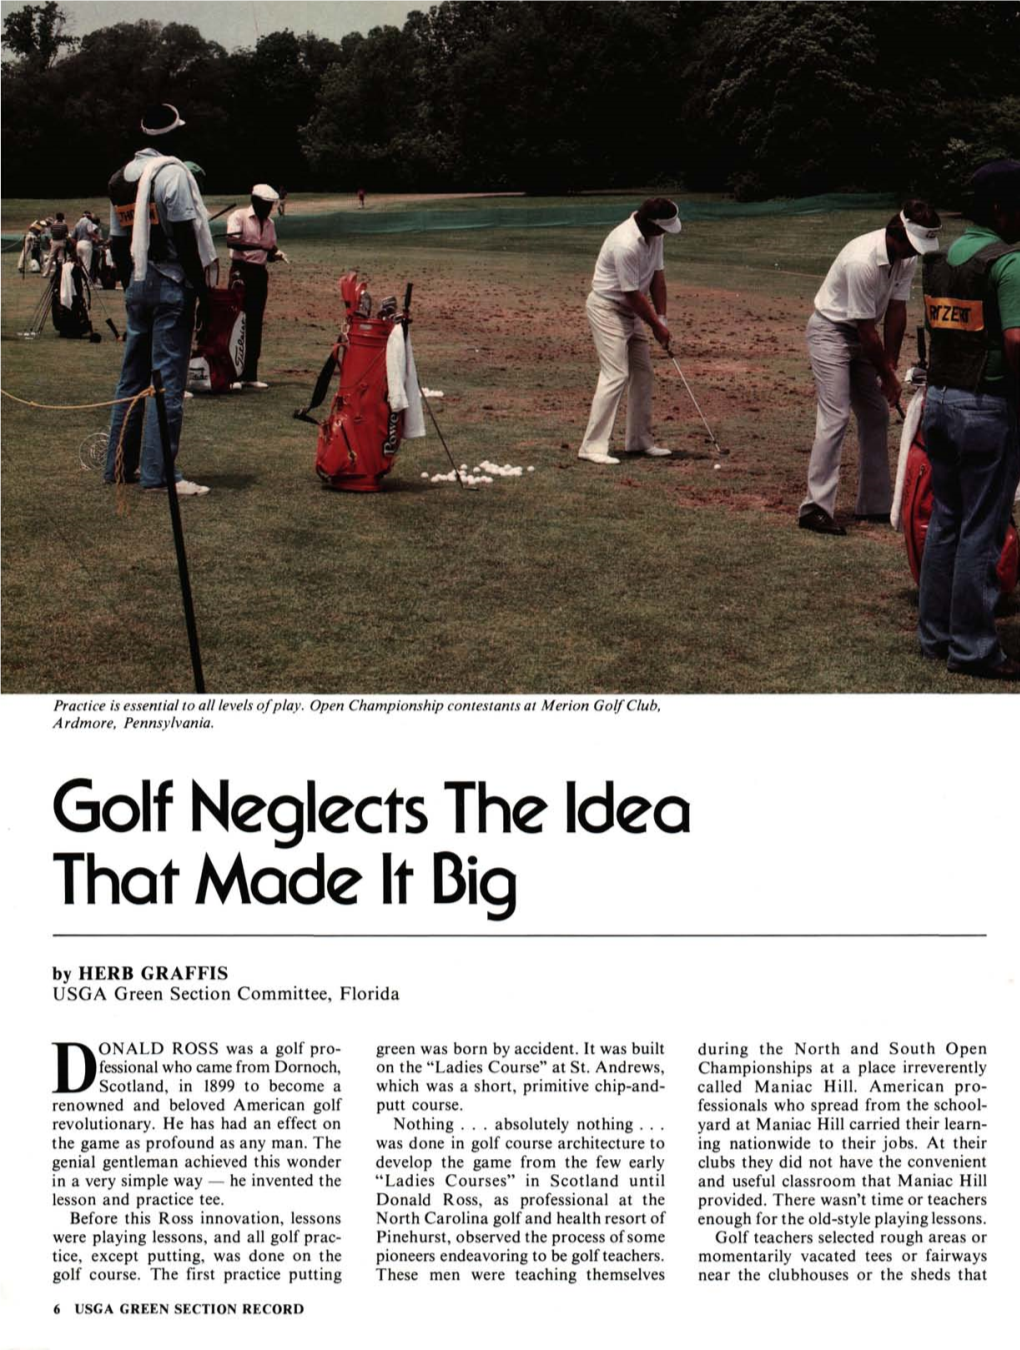 Golf Neglects the Idea That Made It Big by HERB GRAFFIS USGA Green Section Committee, Florida